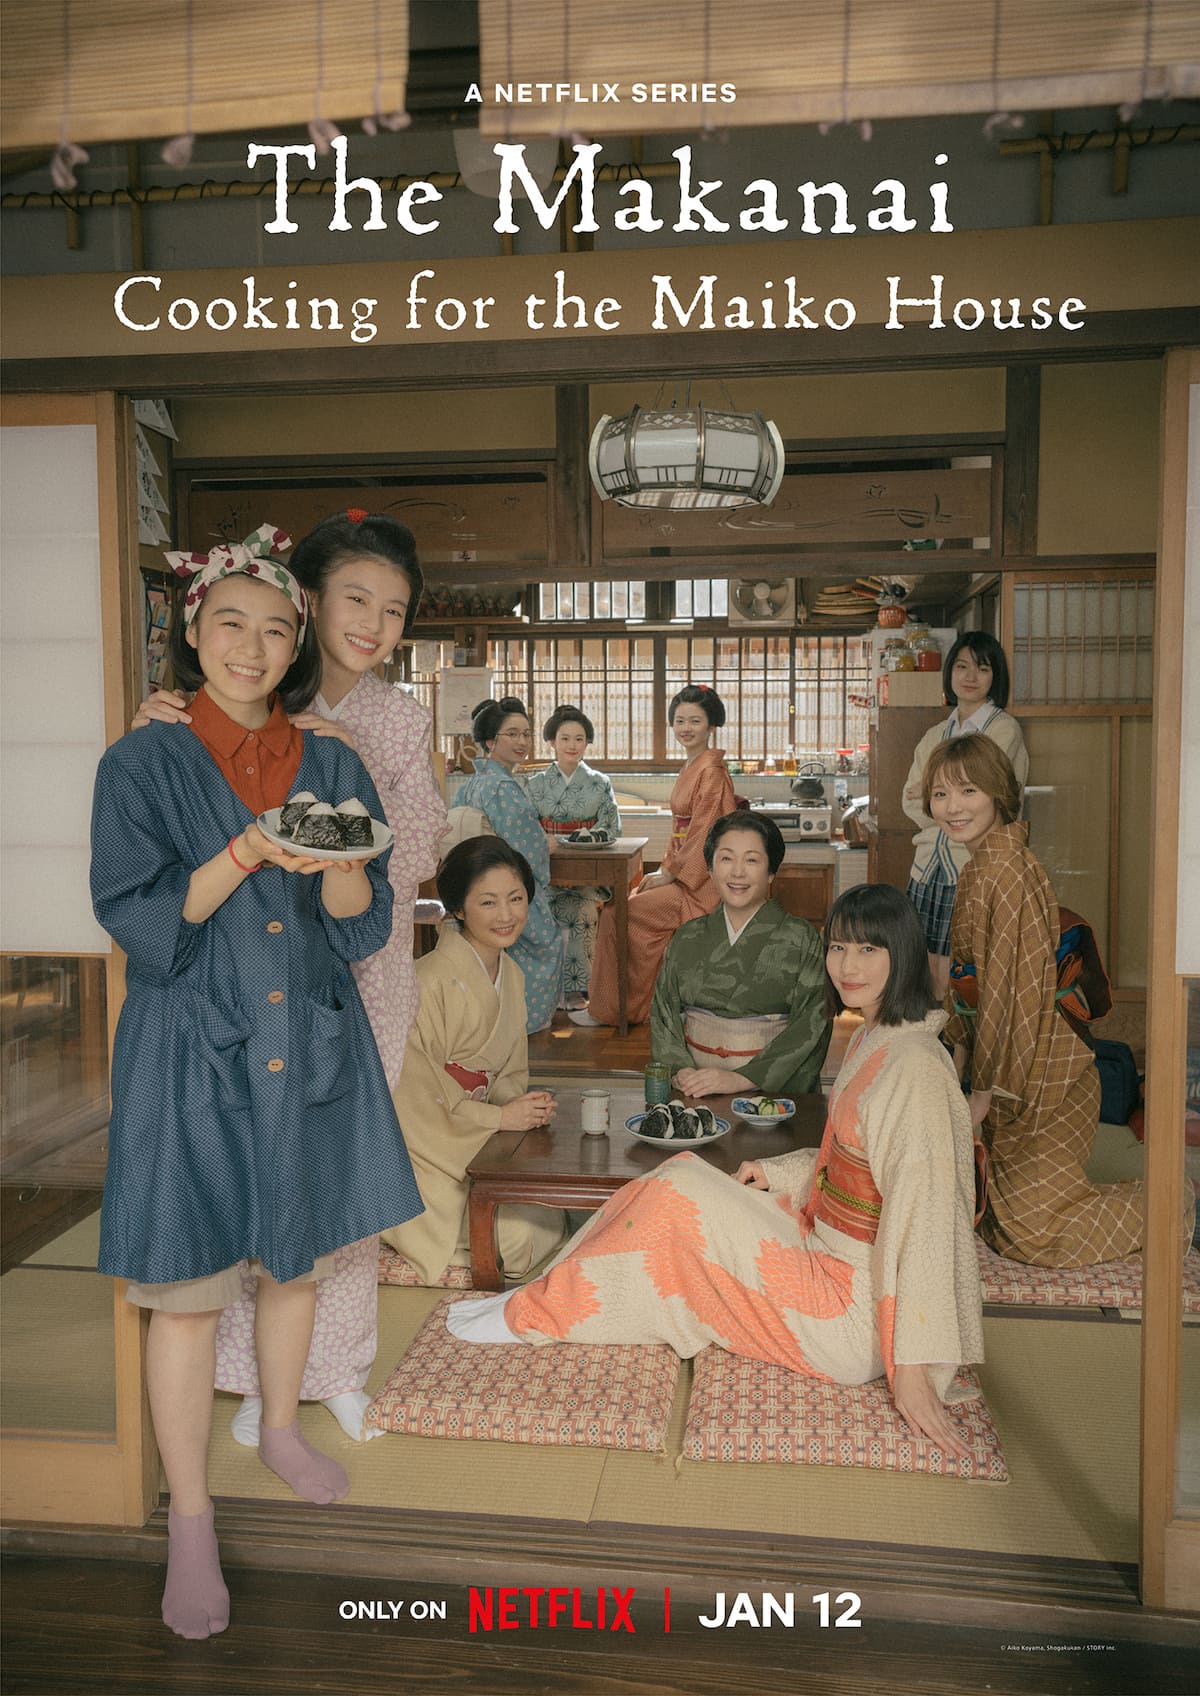 The Makanai: Cooking for the Maiko House Netflix Copy